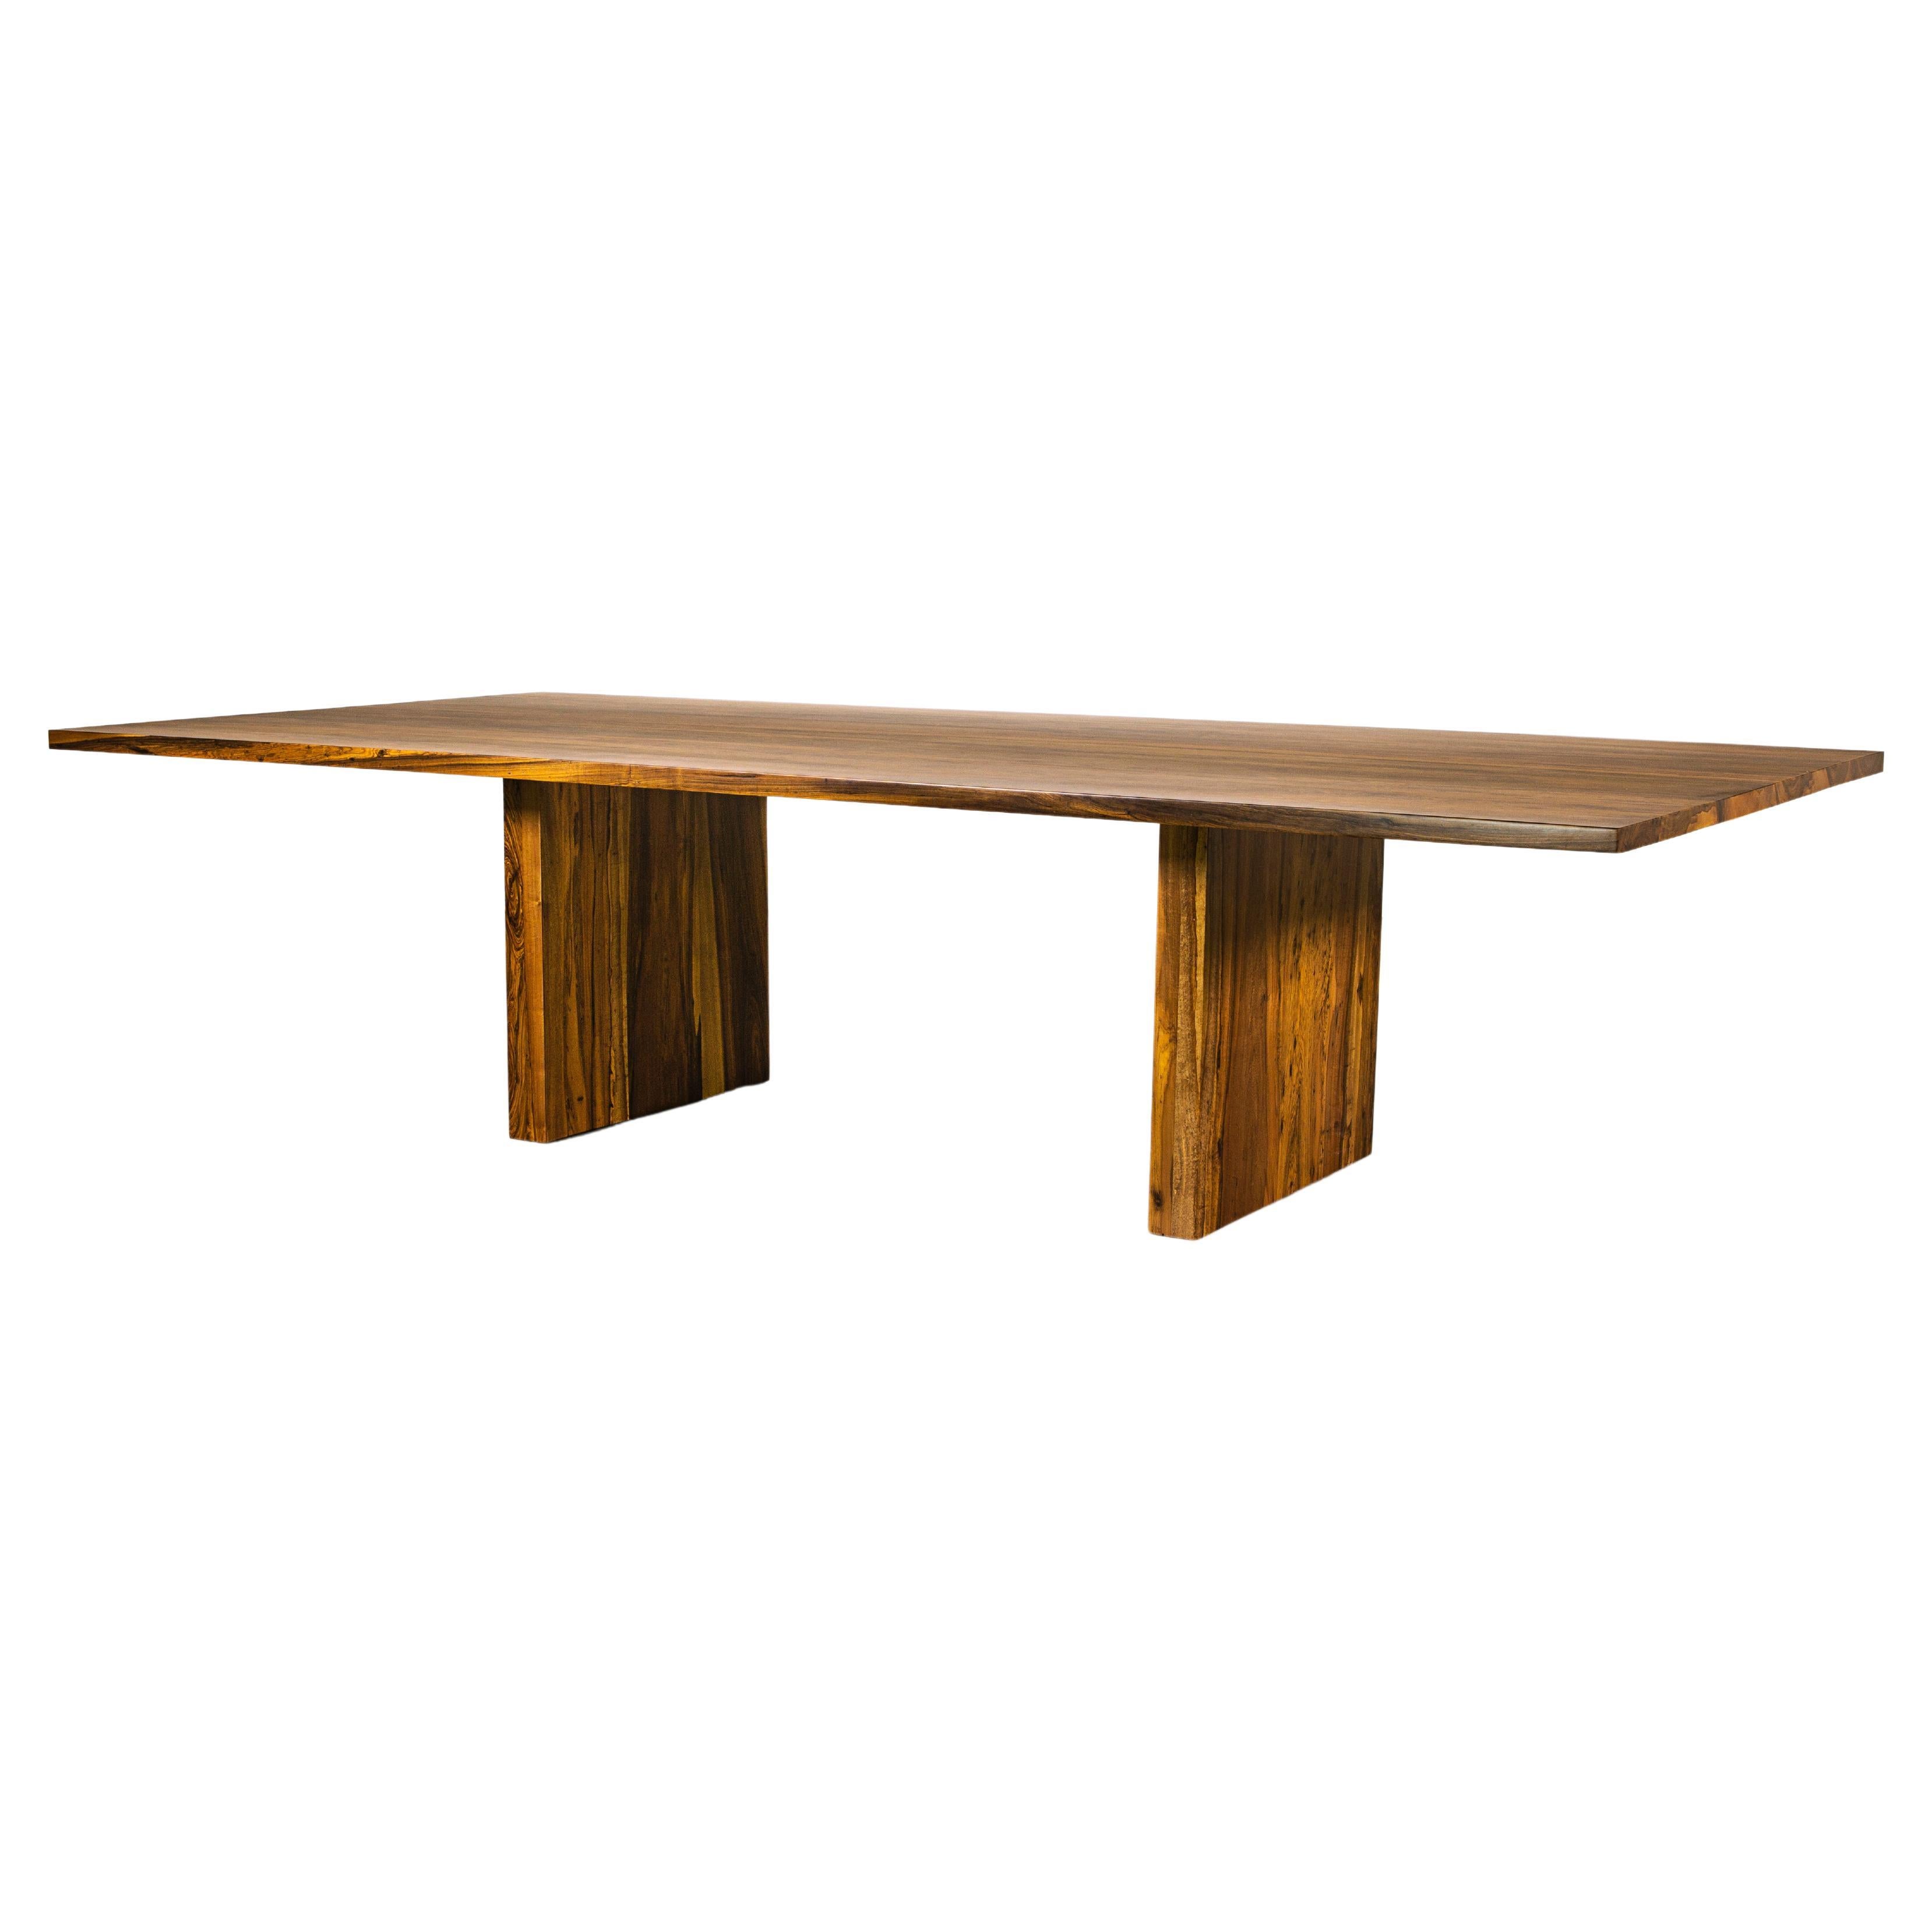 Exotic Wood Twin Pedestal Modern Minimal Dining Table from Costantini, Andre